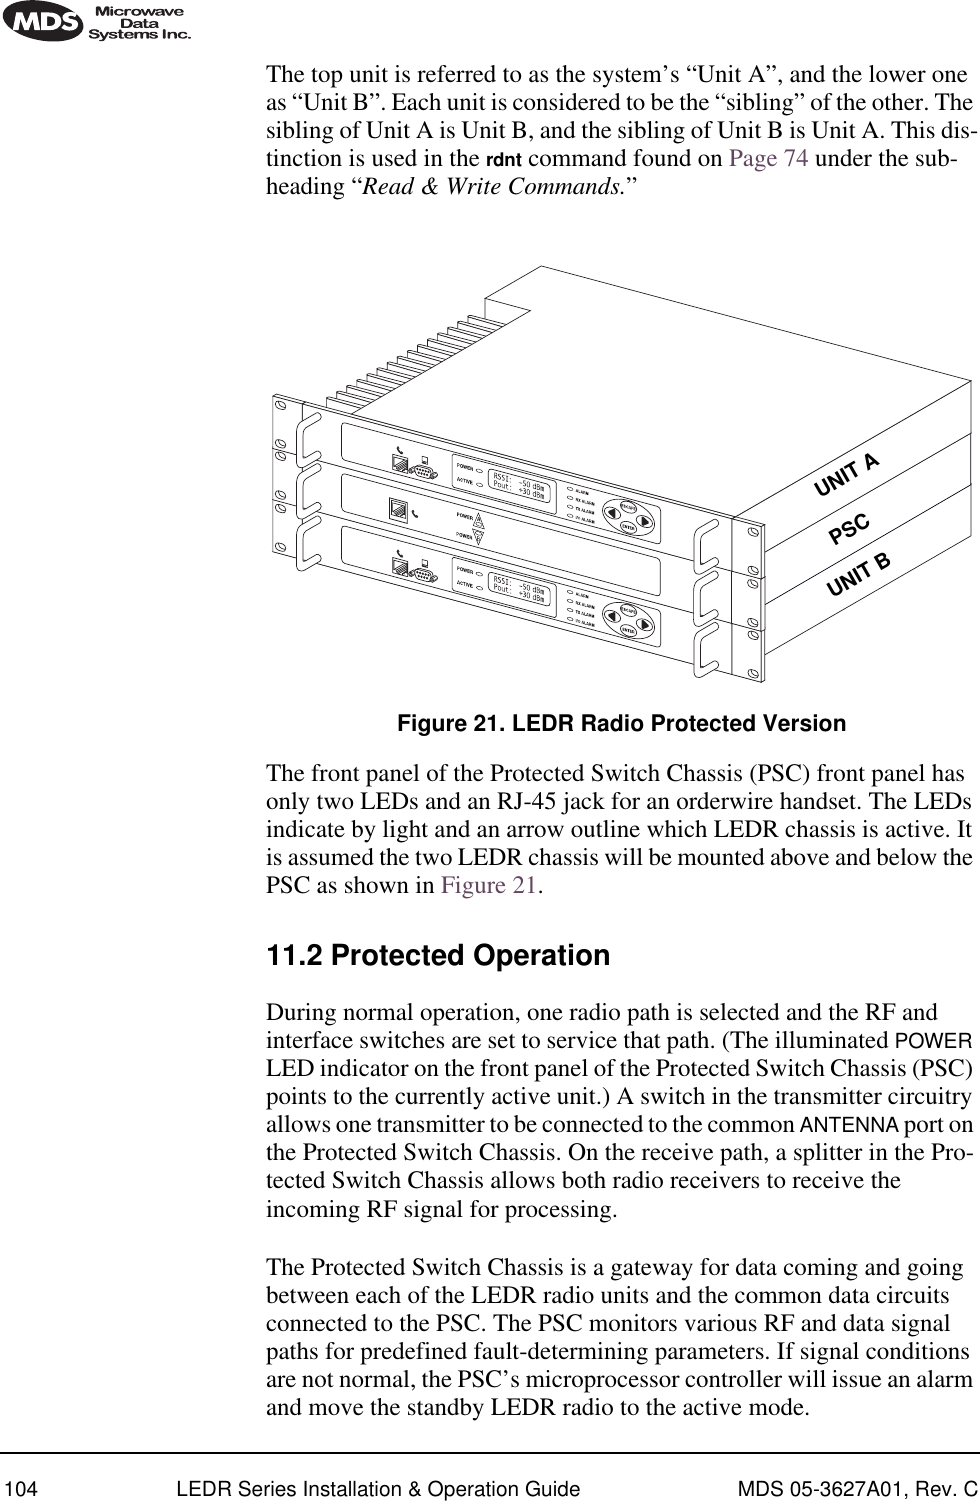 104 LEDR Series Installation &amp; Operation Guide MDS 05-3627A01, Rev. CThe top unit is referred to as the system’s “Unit A”, and the lower one as “Unit B”. Each unit is considered to be the “sibling” of the other. The sibling of Unit A is Unit B, and the sibling of Unit B is Unit A. This dis-tinction is used in the rdnt command found on Page 74 under the sub-heading “Read &amp; Write Commands.”Invisible place holderFigure 21. LEDR Radio Protected VersionThe front panel of the Protected Switch Chassis (PSC) front panel has only two LEDs and an RJ-45 jack for an orderwire handset. The LEDs indicate by light and an arrow outline which LEDR chassis is active. It is assumed the two LEDR chassis will be mounted above and below the PSC as shown in Figure 21.11.2 Protected OperationDuring normal operation, one radio path is selected and the RF and interface switches are set to service that path. (The illuminated POWER LED indicator on the front panel of the Protected Switch Chassis (PSC) points to the currently active unit.) A switch in the transmitter circuitry allows one transmitter to be connected to the common ANTENNA port on the Protected Switch Chassis. On the receive path, a splitter in the Pro-tected Switch Chassis allows both radio receivers to receive the incoming RF signal for processing.The Protected Switch Chassis is a gateway for data coming and going between each of the LEDR radio units and the common data circuits connected to the PSC. The PSC monitors various RF and data signal paths for predefined fault-determining parameters. If signal conditions are not normal, the PSC’s microprocessor controller will issue an alarm and move the standby LEDR radio to the active mode.UNIT AUNIT BPSC